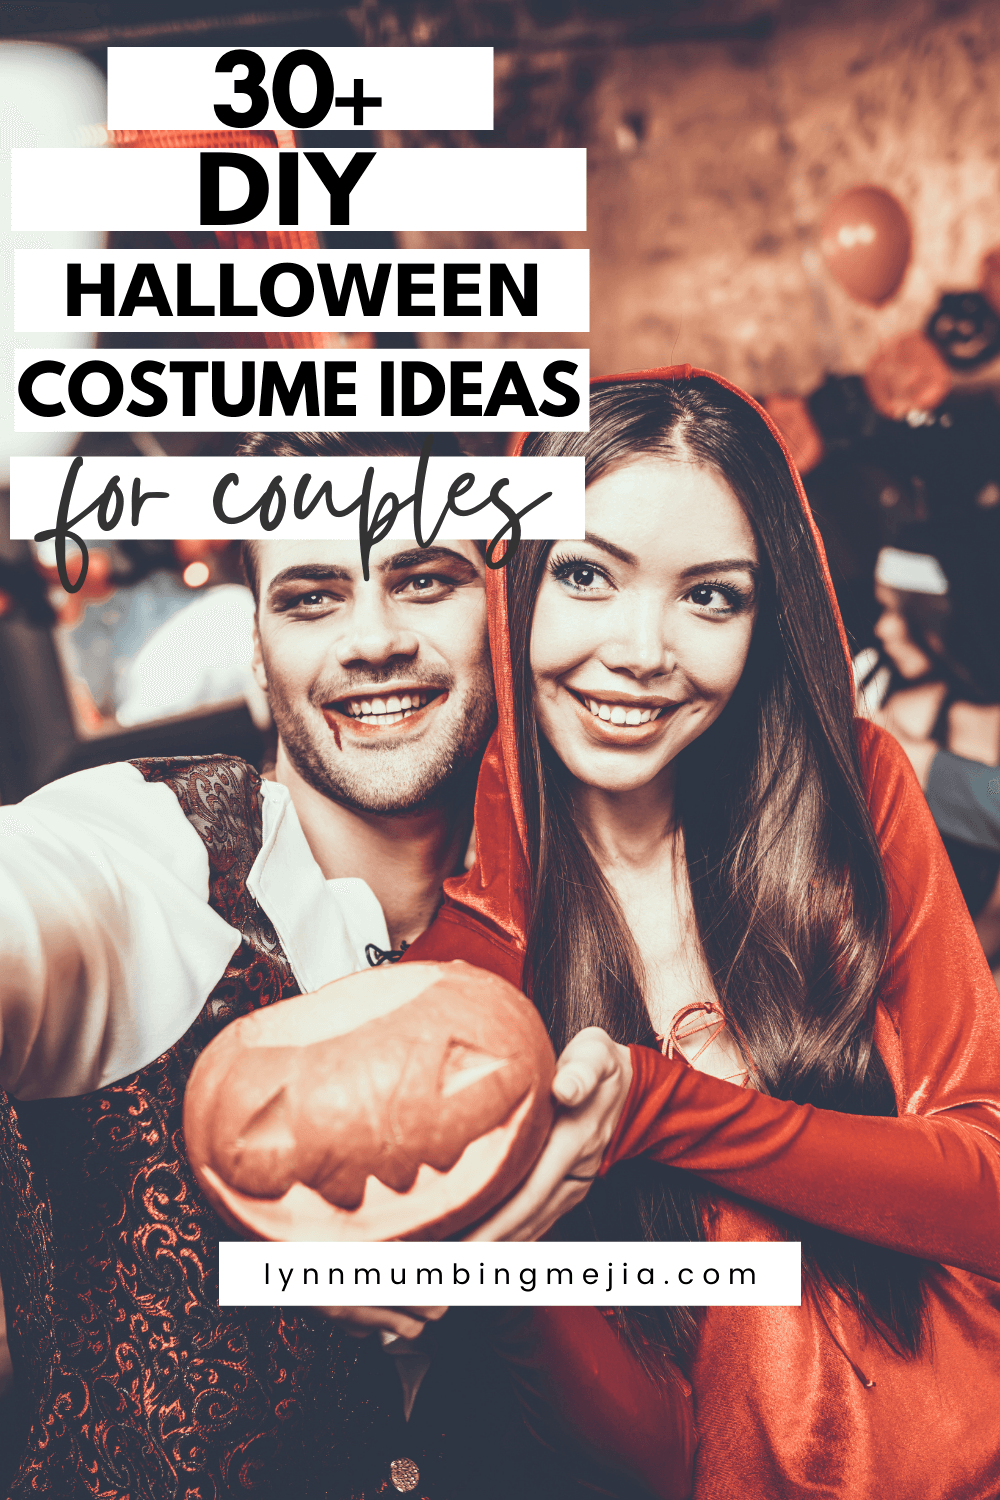 30+ DIY Halloween Costume Ideas for Couples - Pin 2